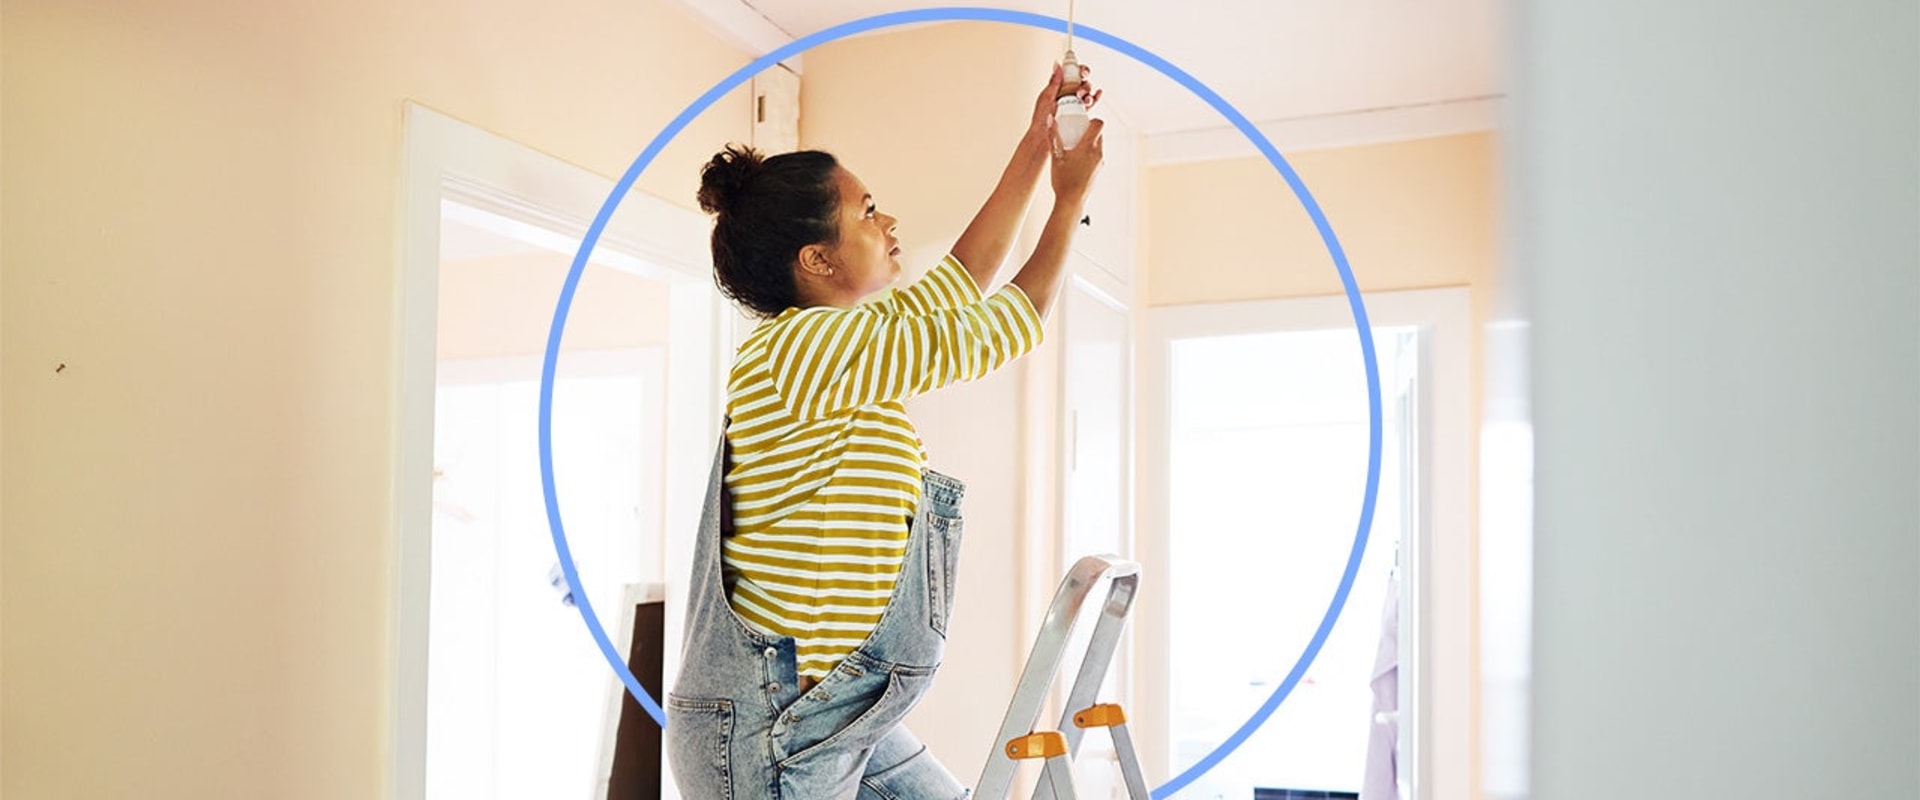 DIY vs. Hiring a Professional: Which is Best for Home Repairs?